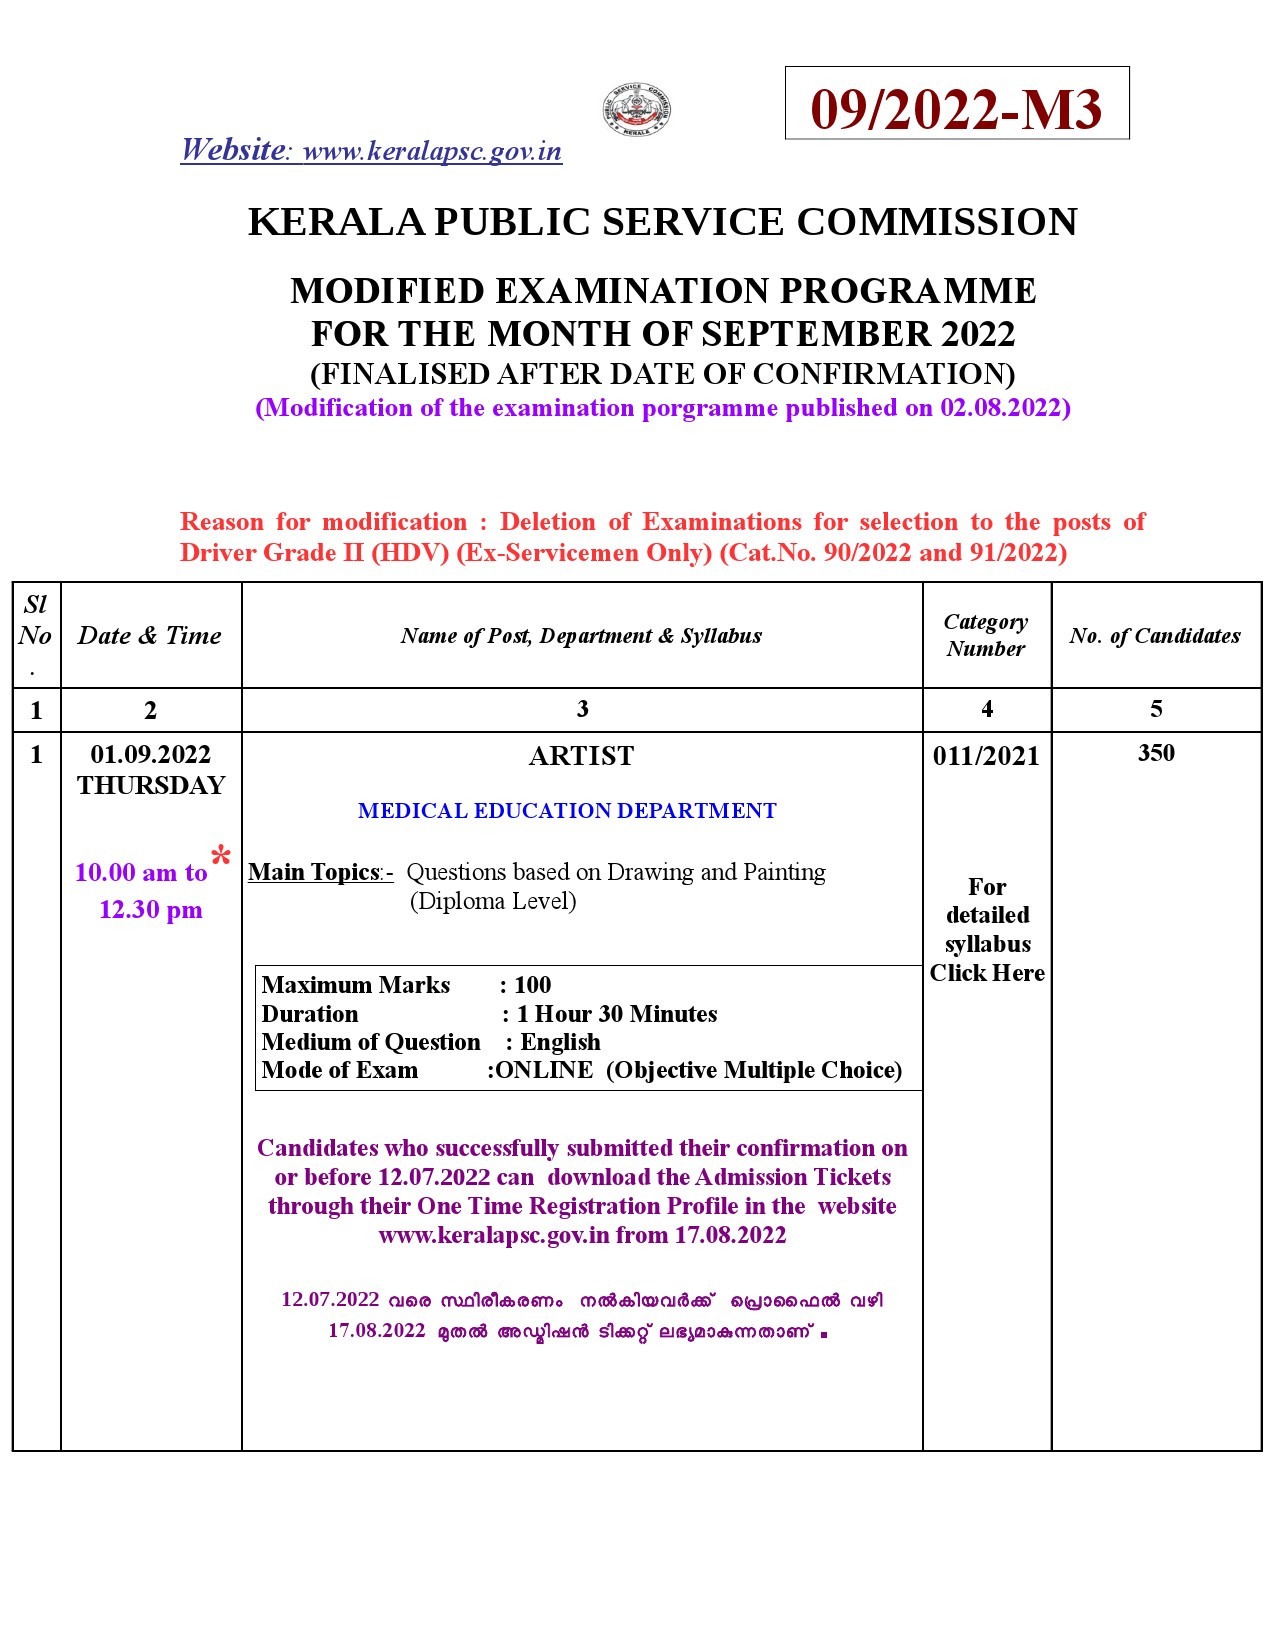 KPSC Modified Exam For The Month Of September 2022 - Notification Image 1